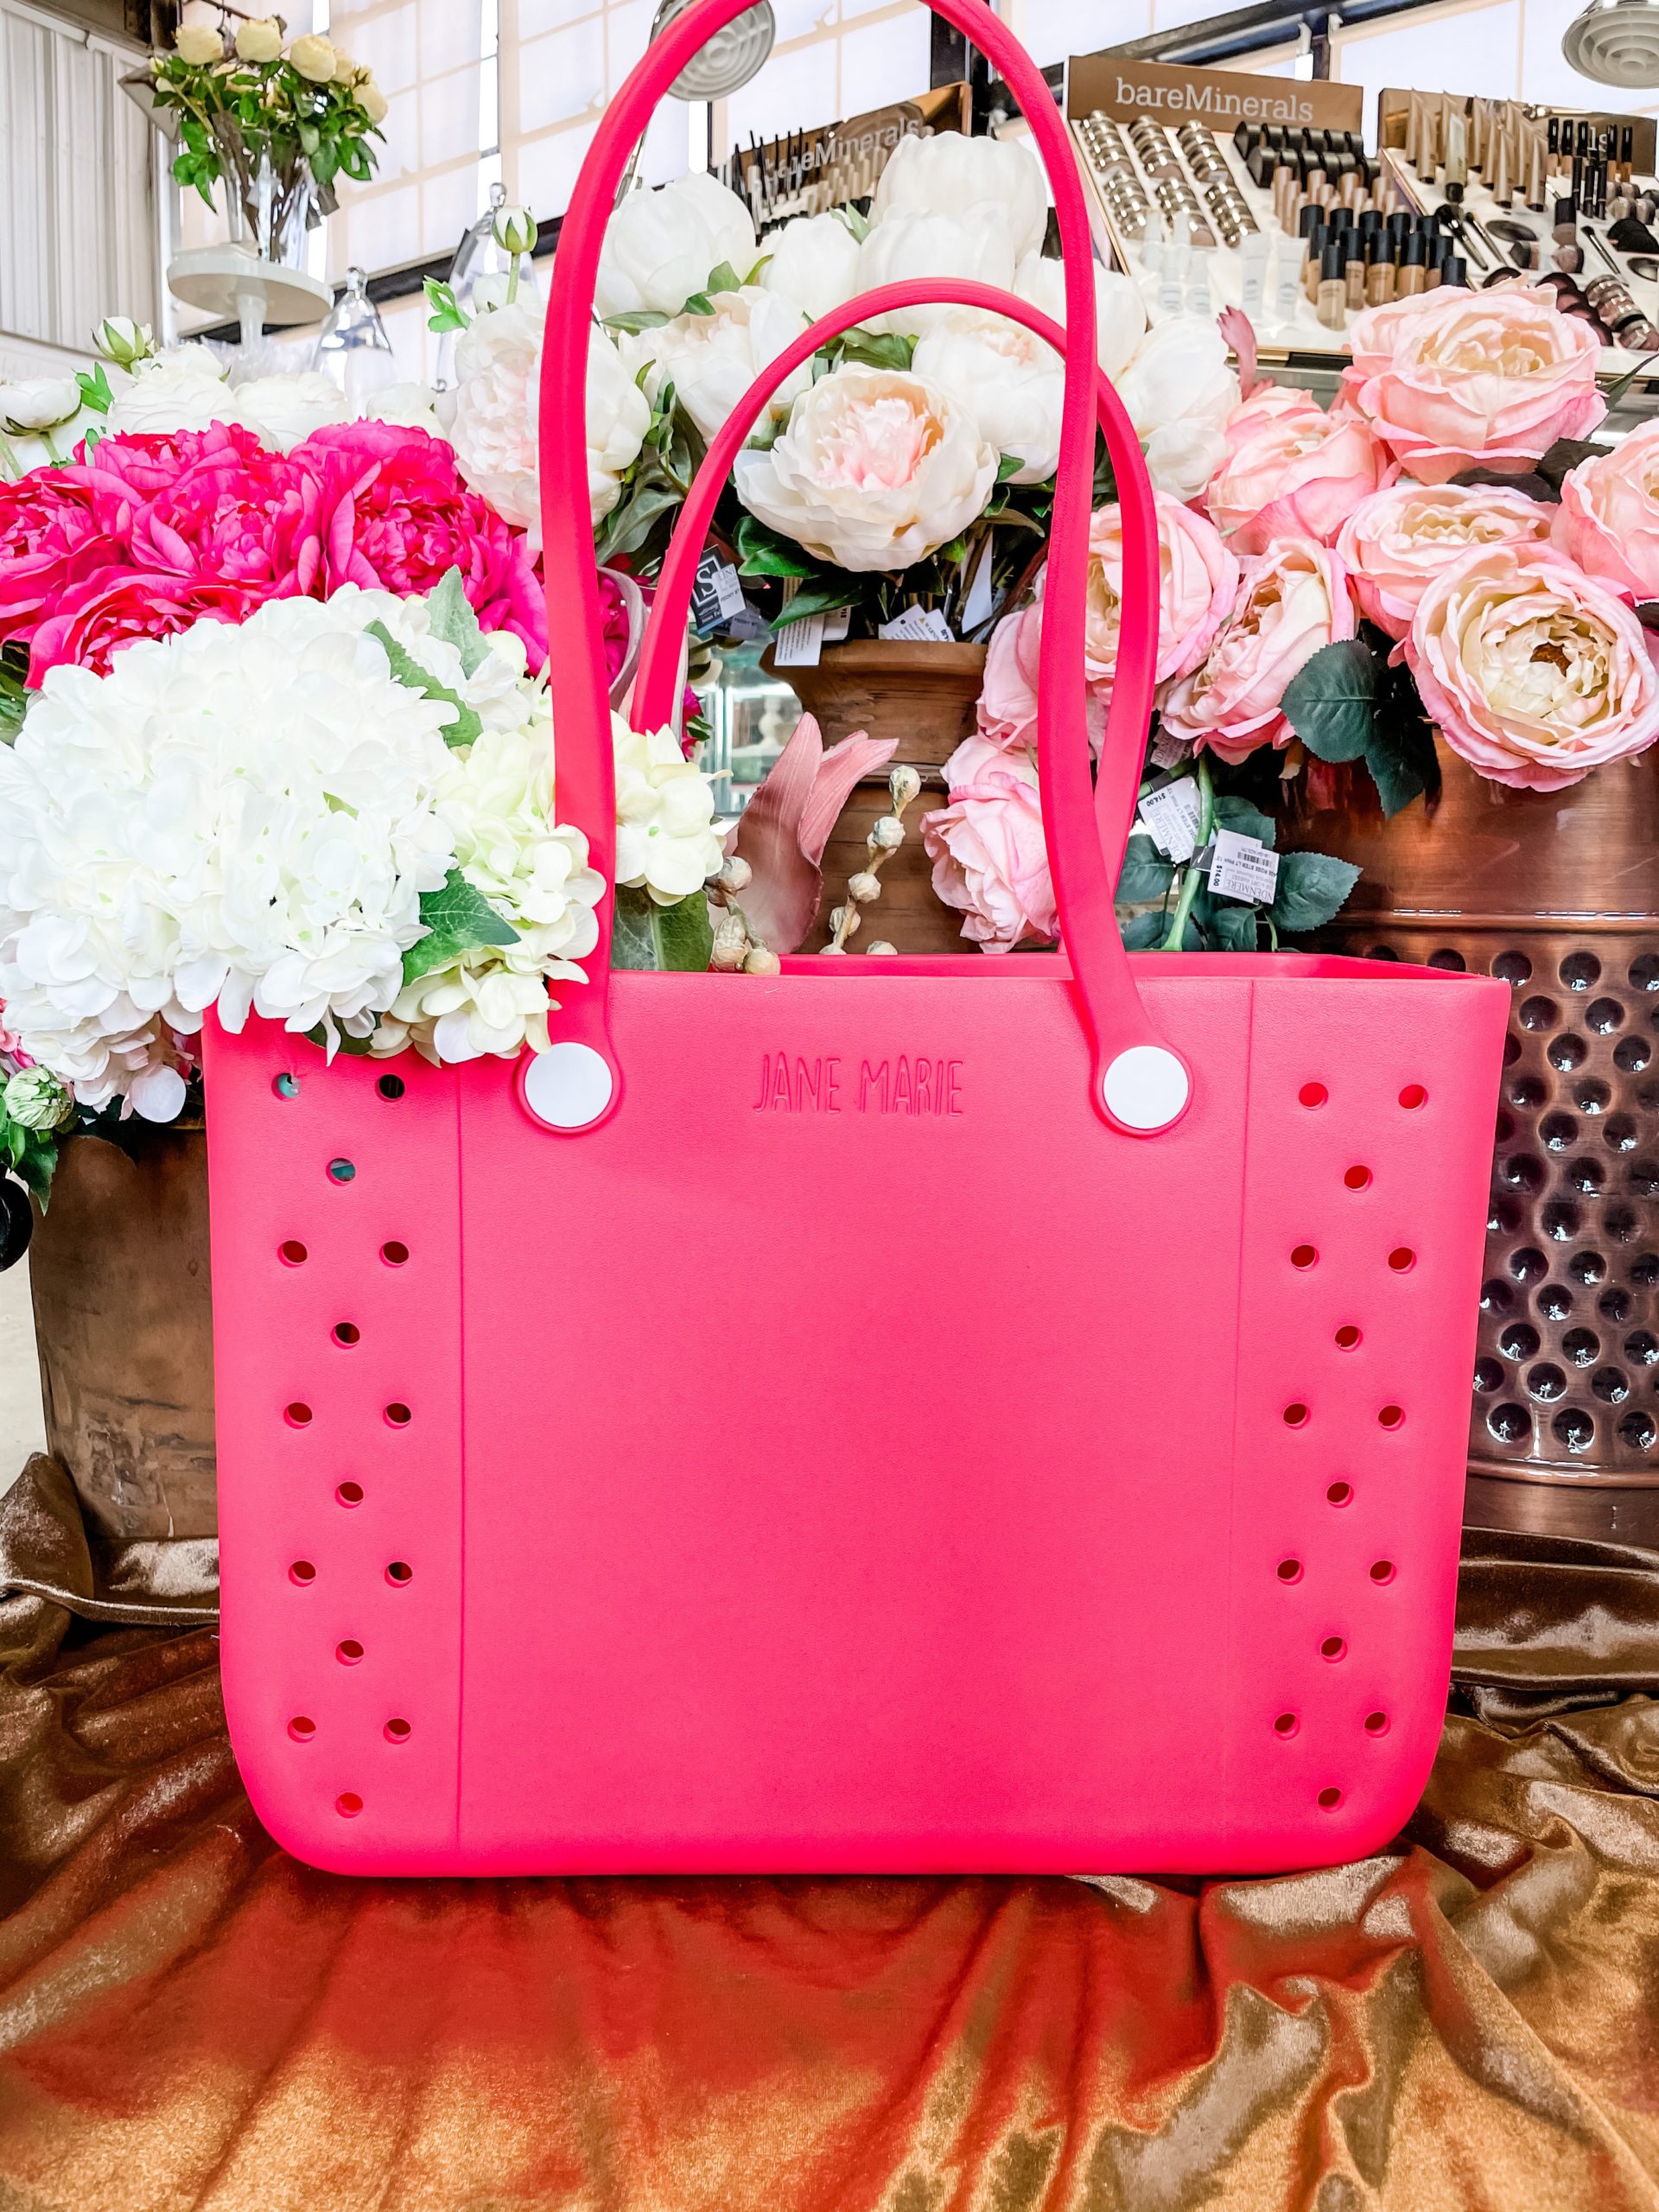 https://www.lindenmere.market/wp-content/uploads/2021/05/Pink-Tote-scaled.jpg